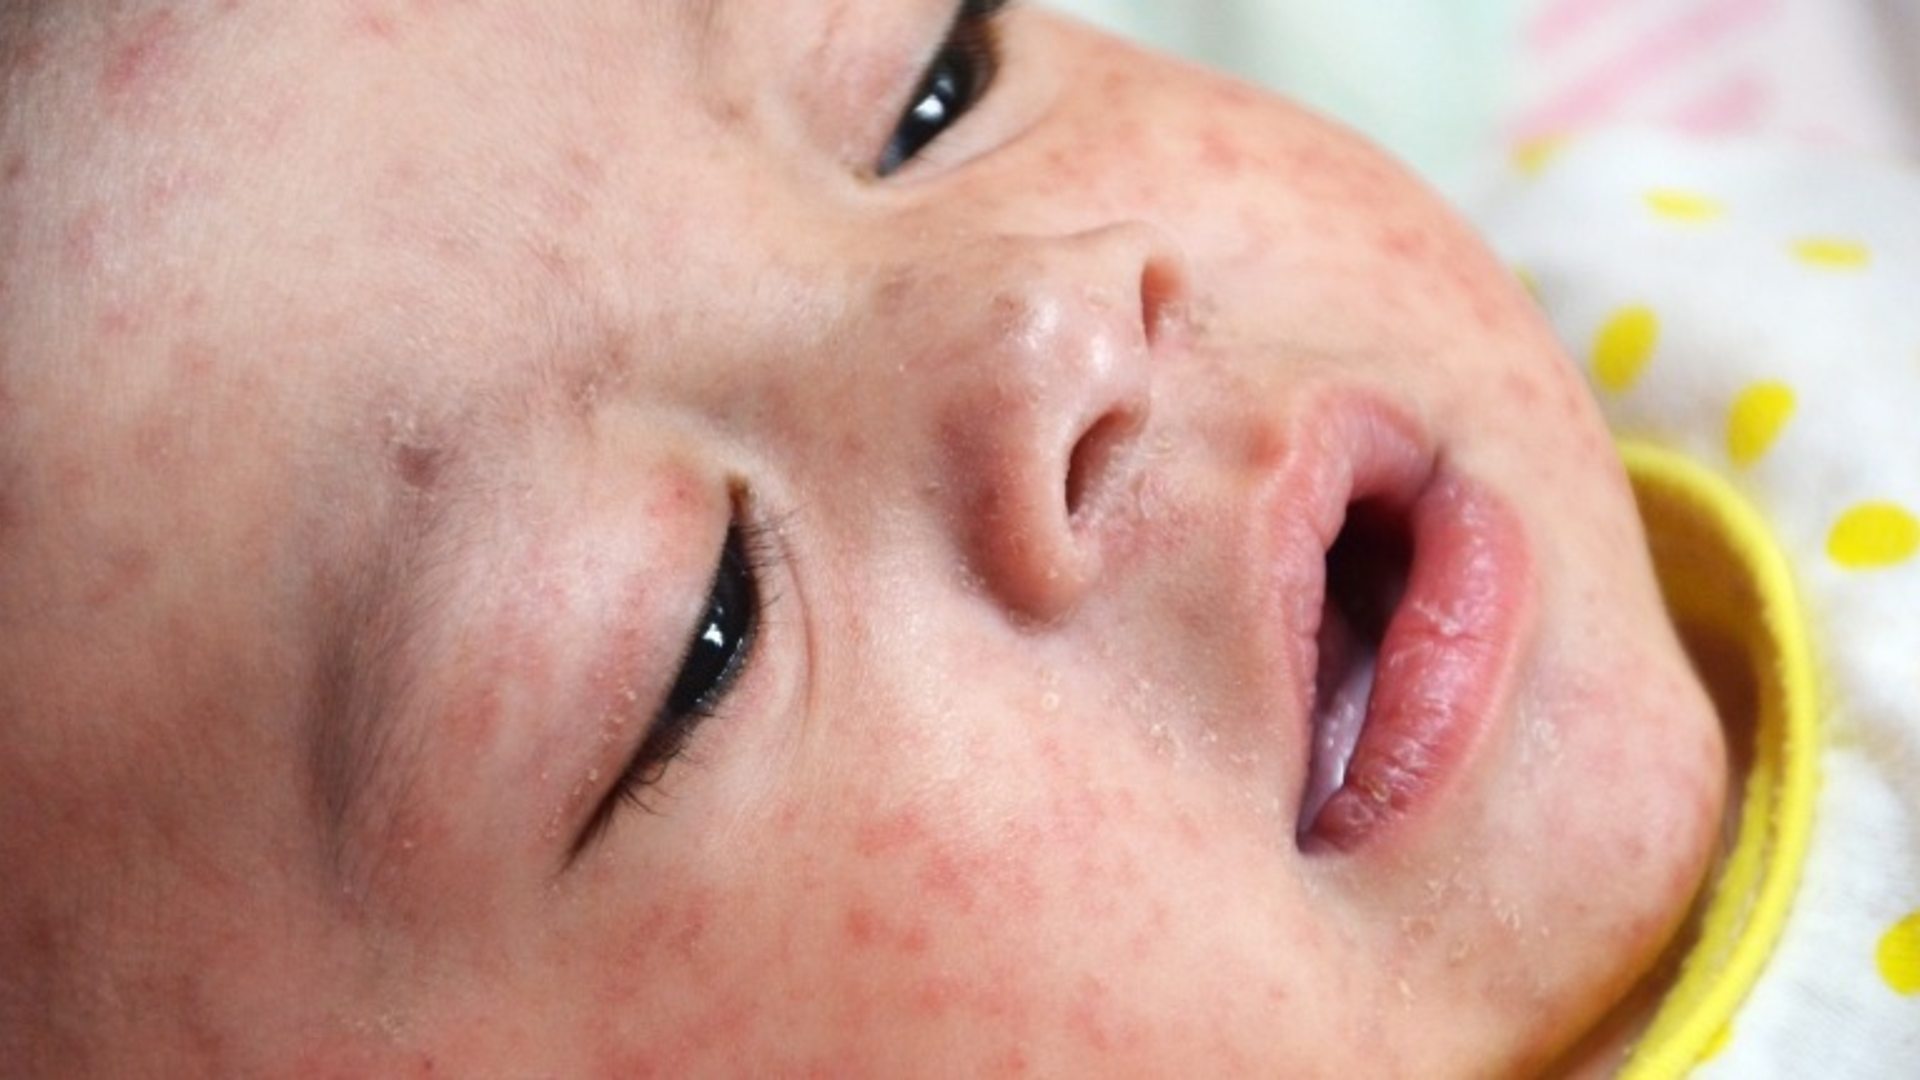 Why is there a measles outbreak in Europe?